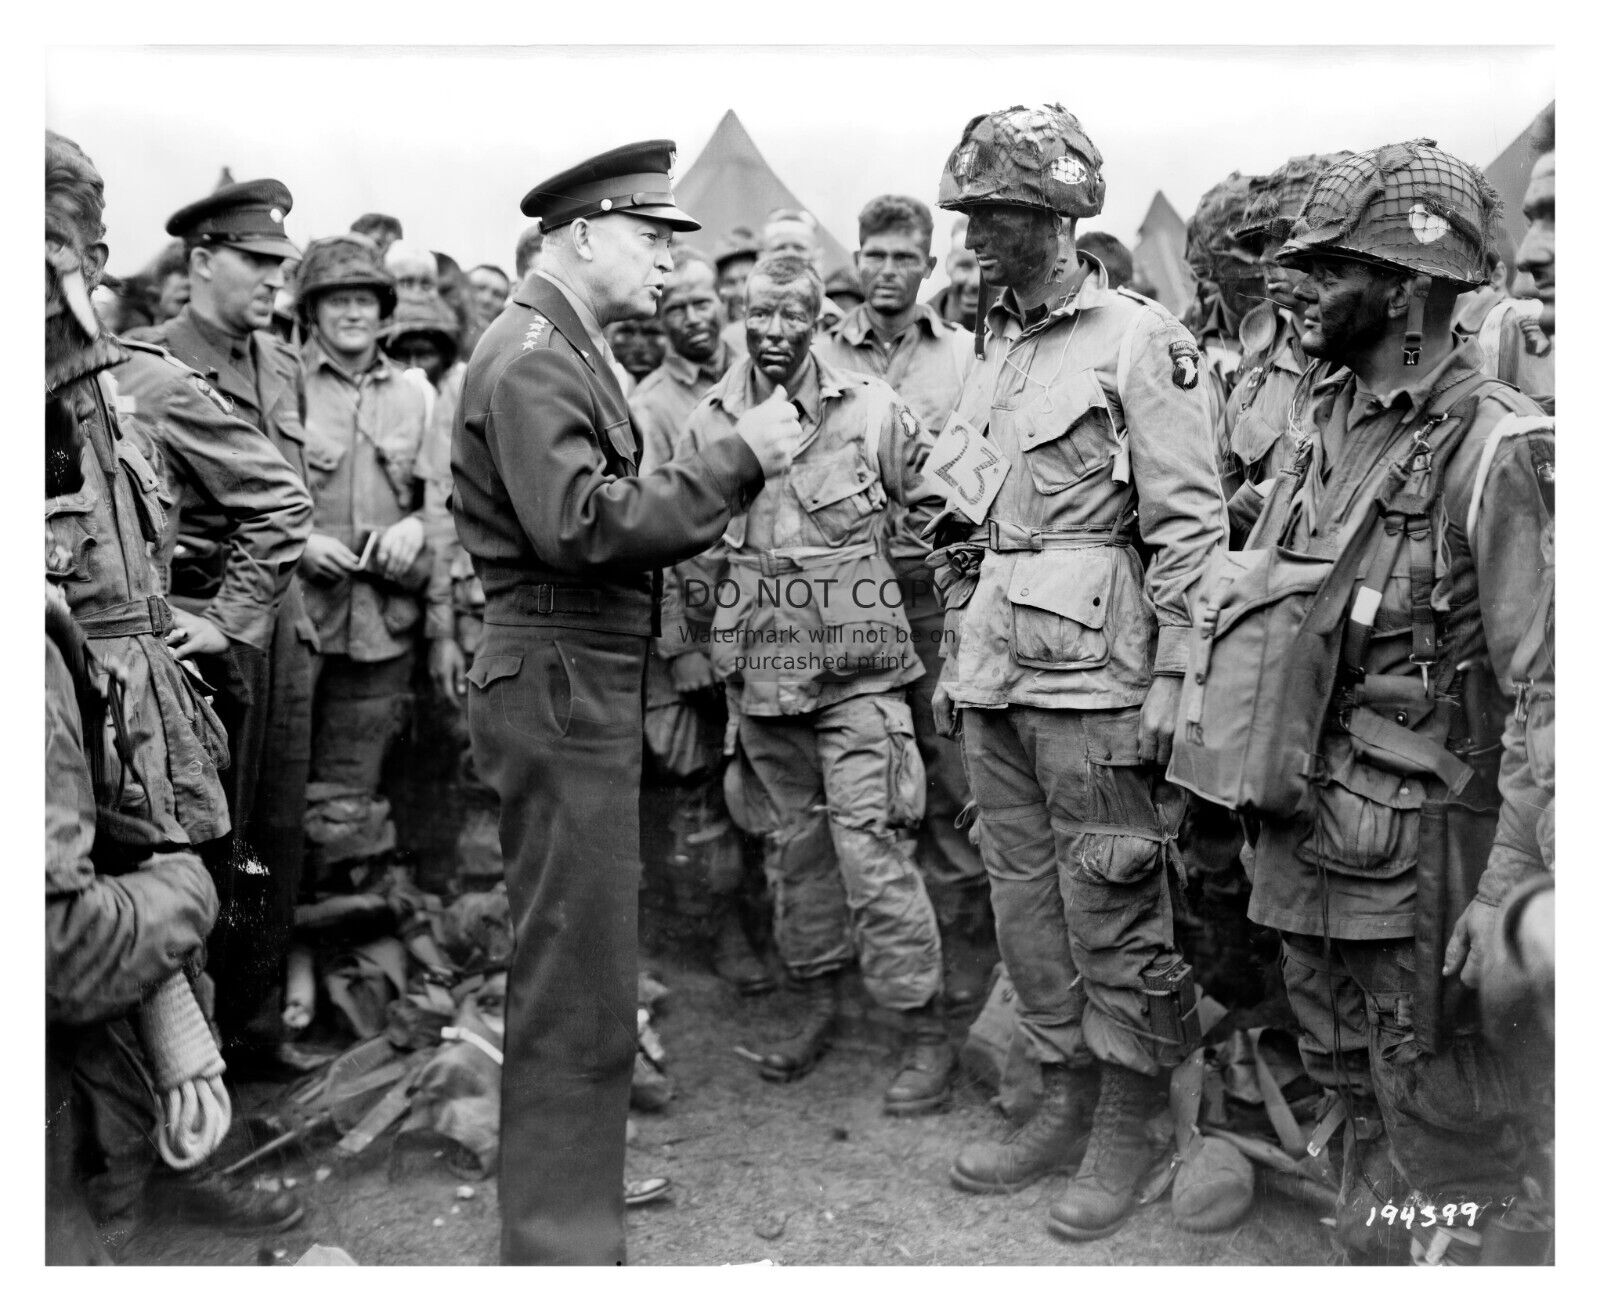 PRESIDENT DWIGHT D. EISENHOWER WITH 101ST AIRBORNE 8X10 PHOTO